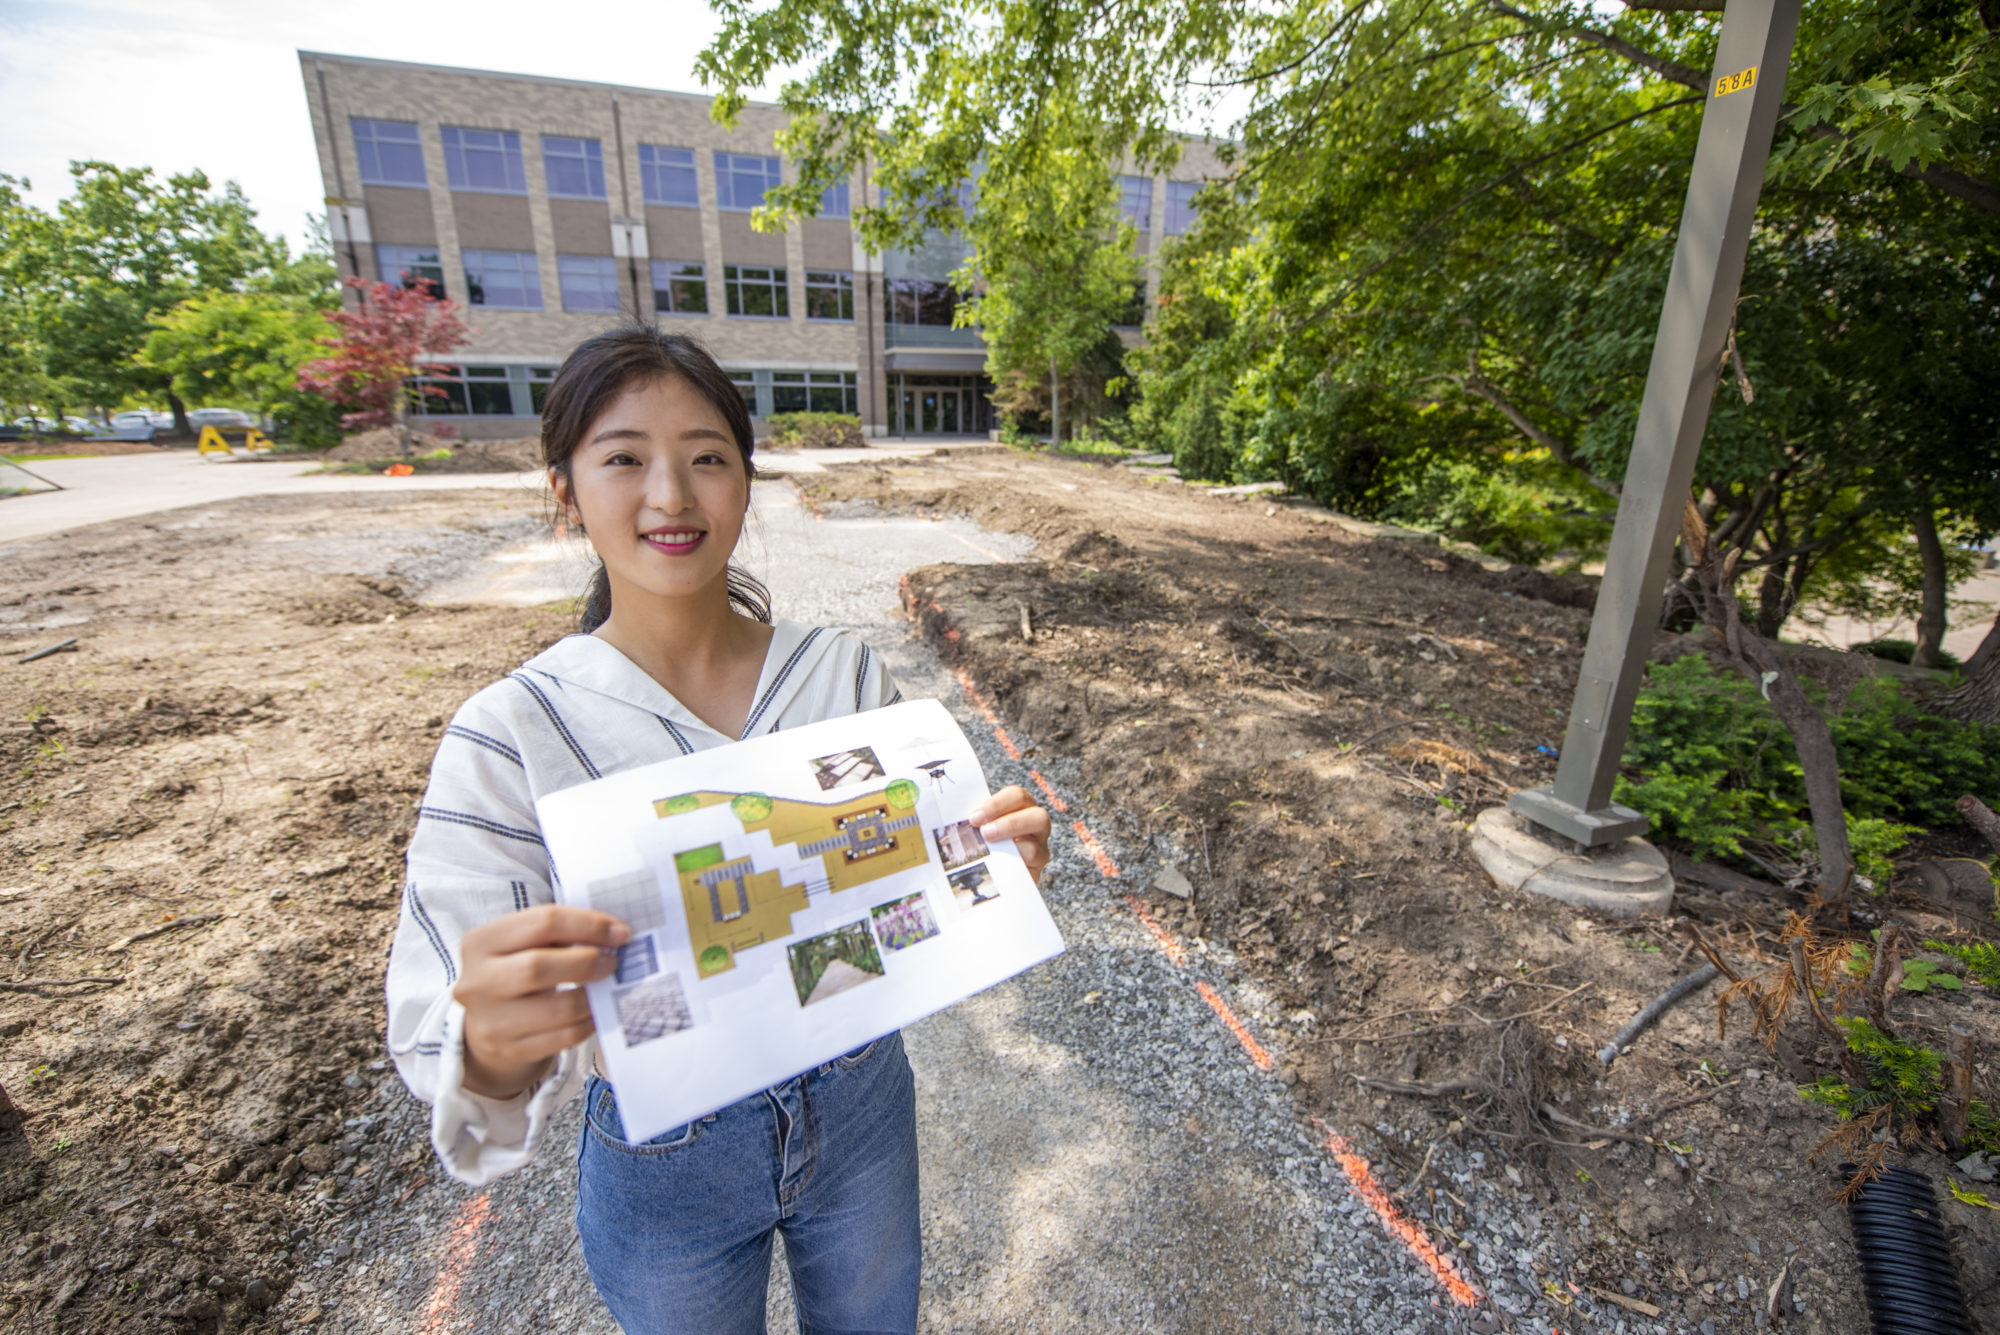 Student Alice Lee is holdiing up her design plans outside at the Daniel . Patterson Campus in Niagara-on-the-Lake where work is underway for the memorial garden.